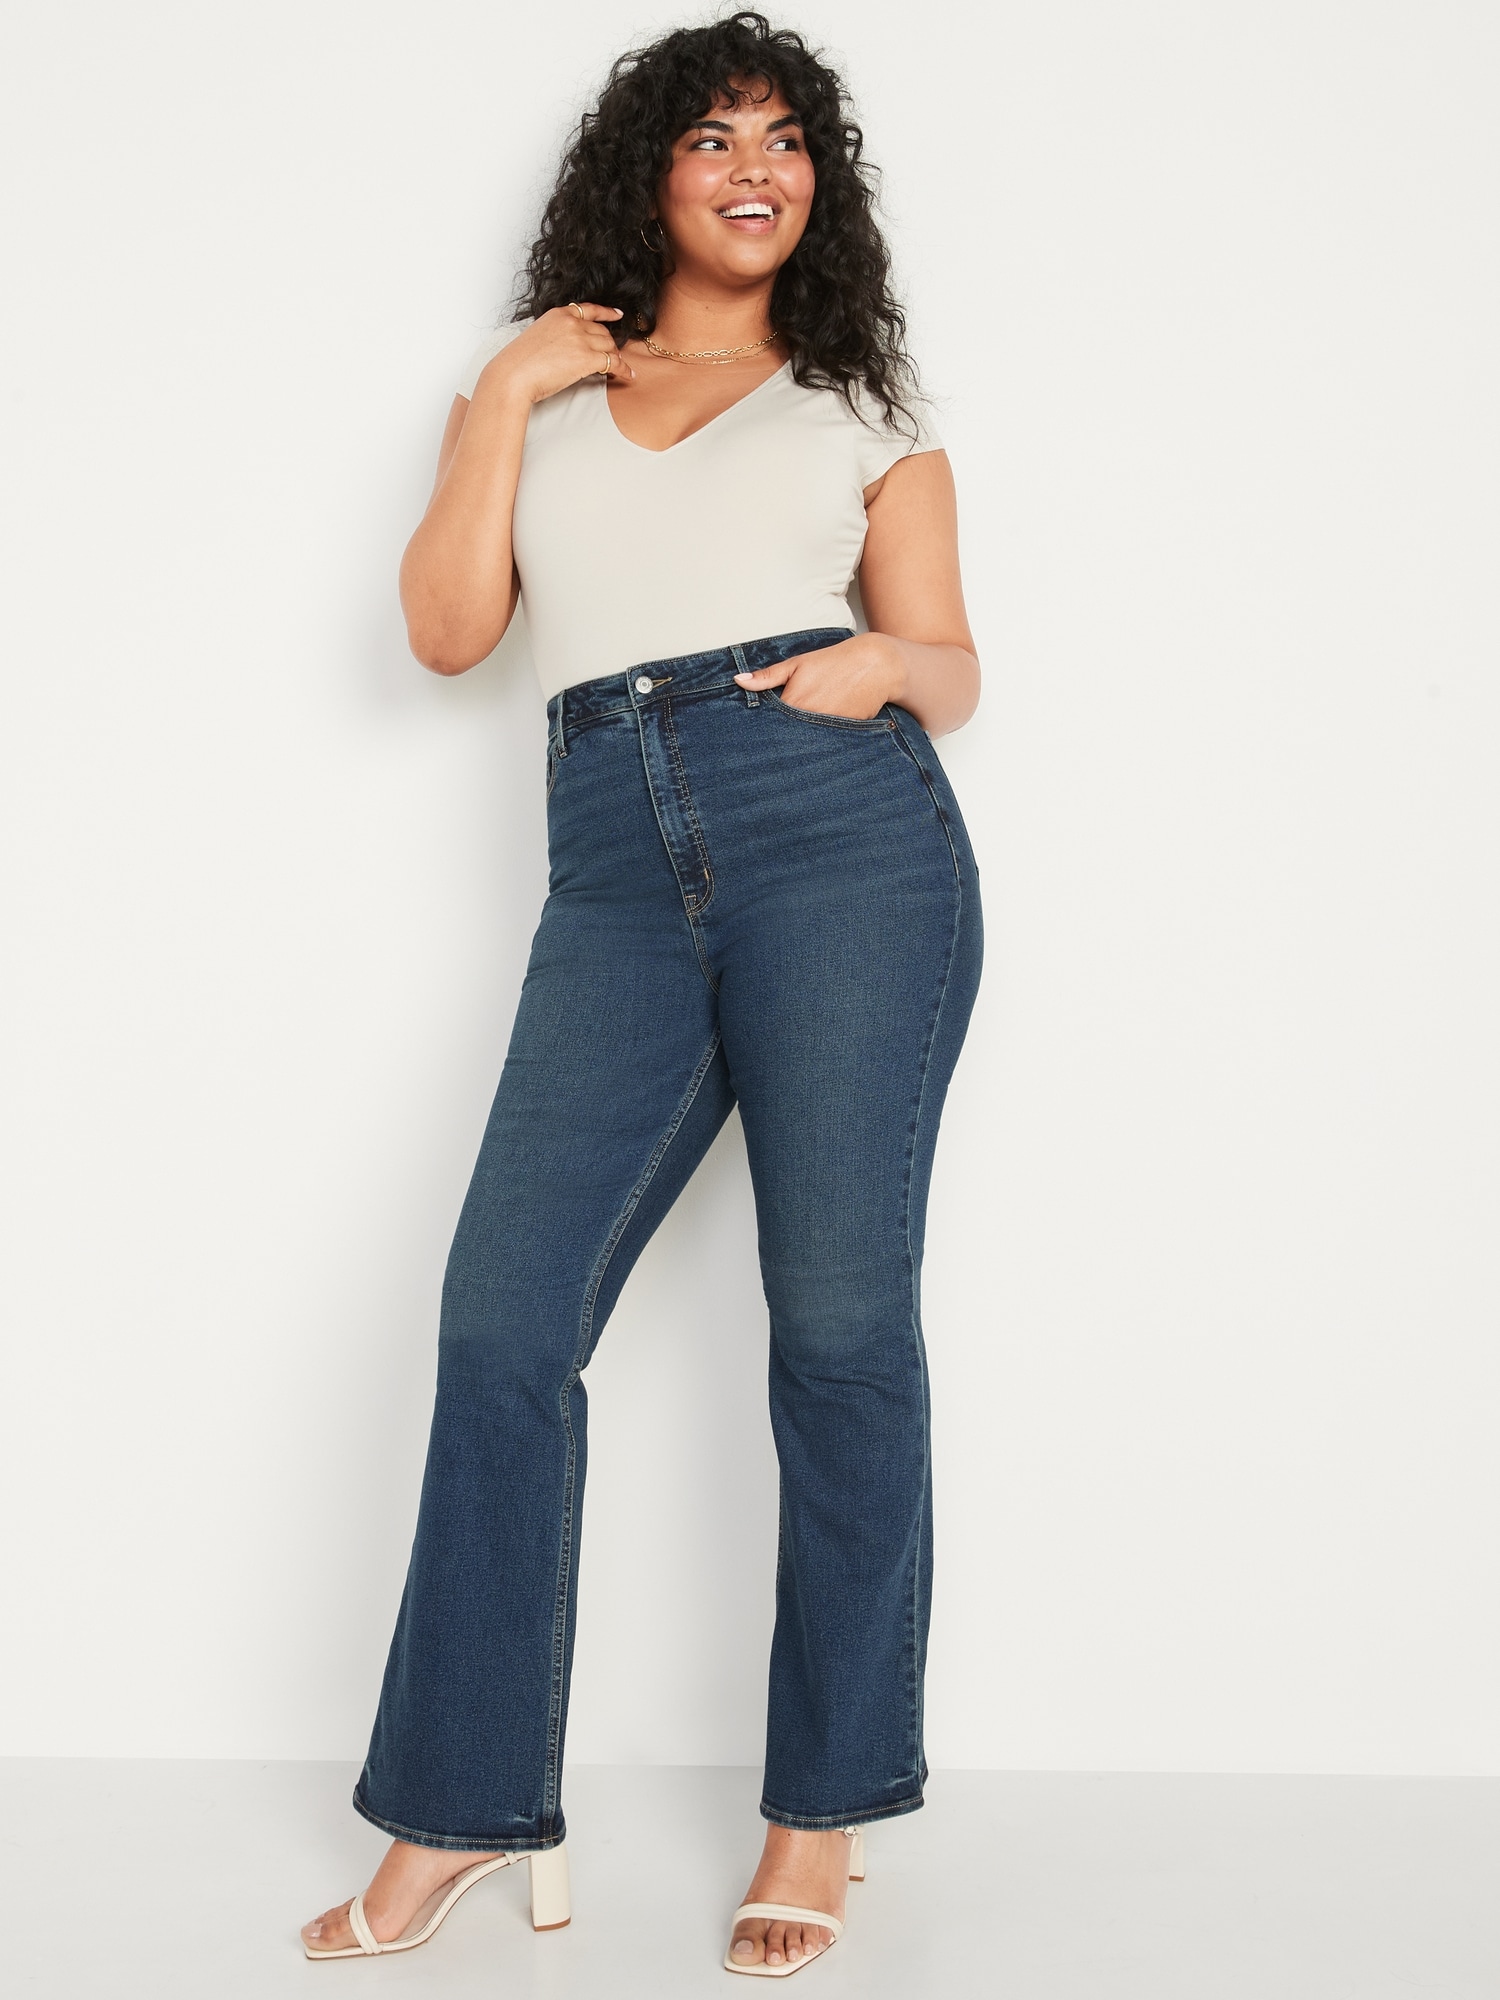 High-Waisted Eco-Friendly Vintage Flare Jeans For Women, Old Navy